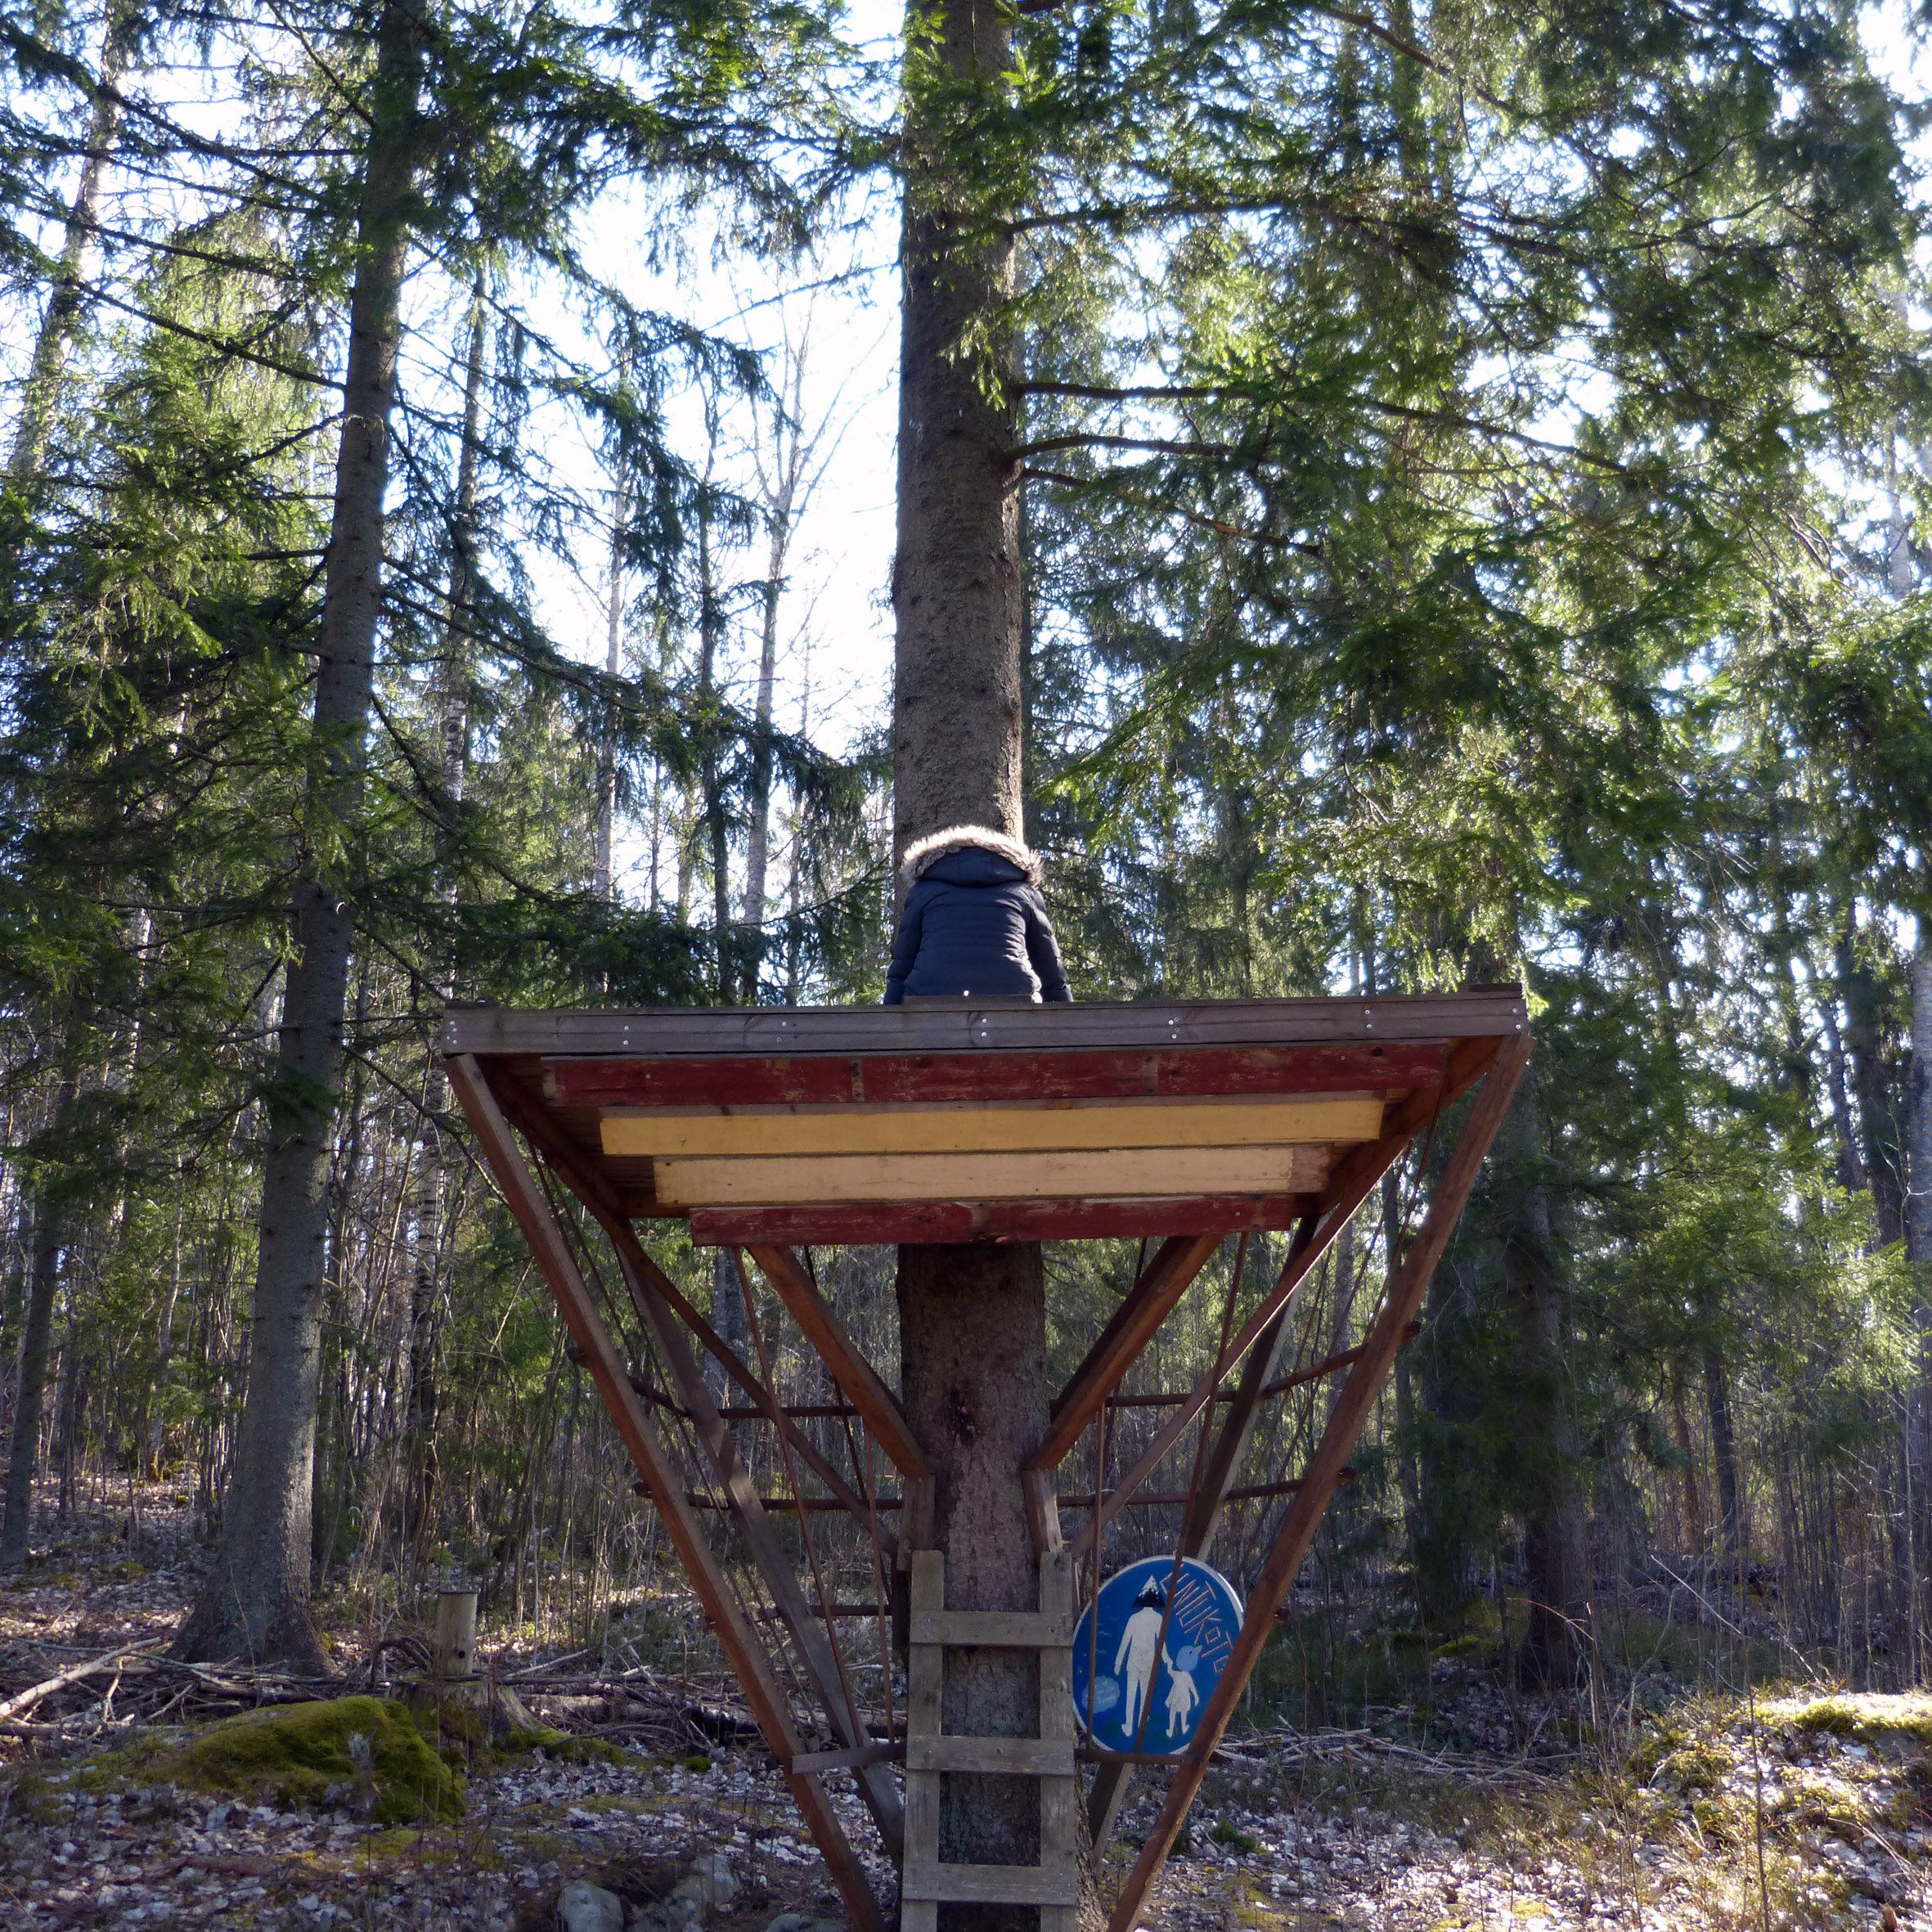 Me in a tree house during my last Finland forest walk